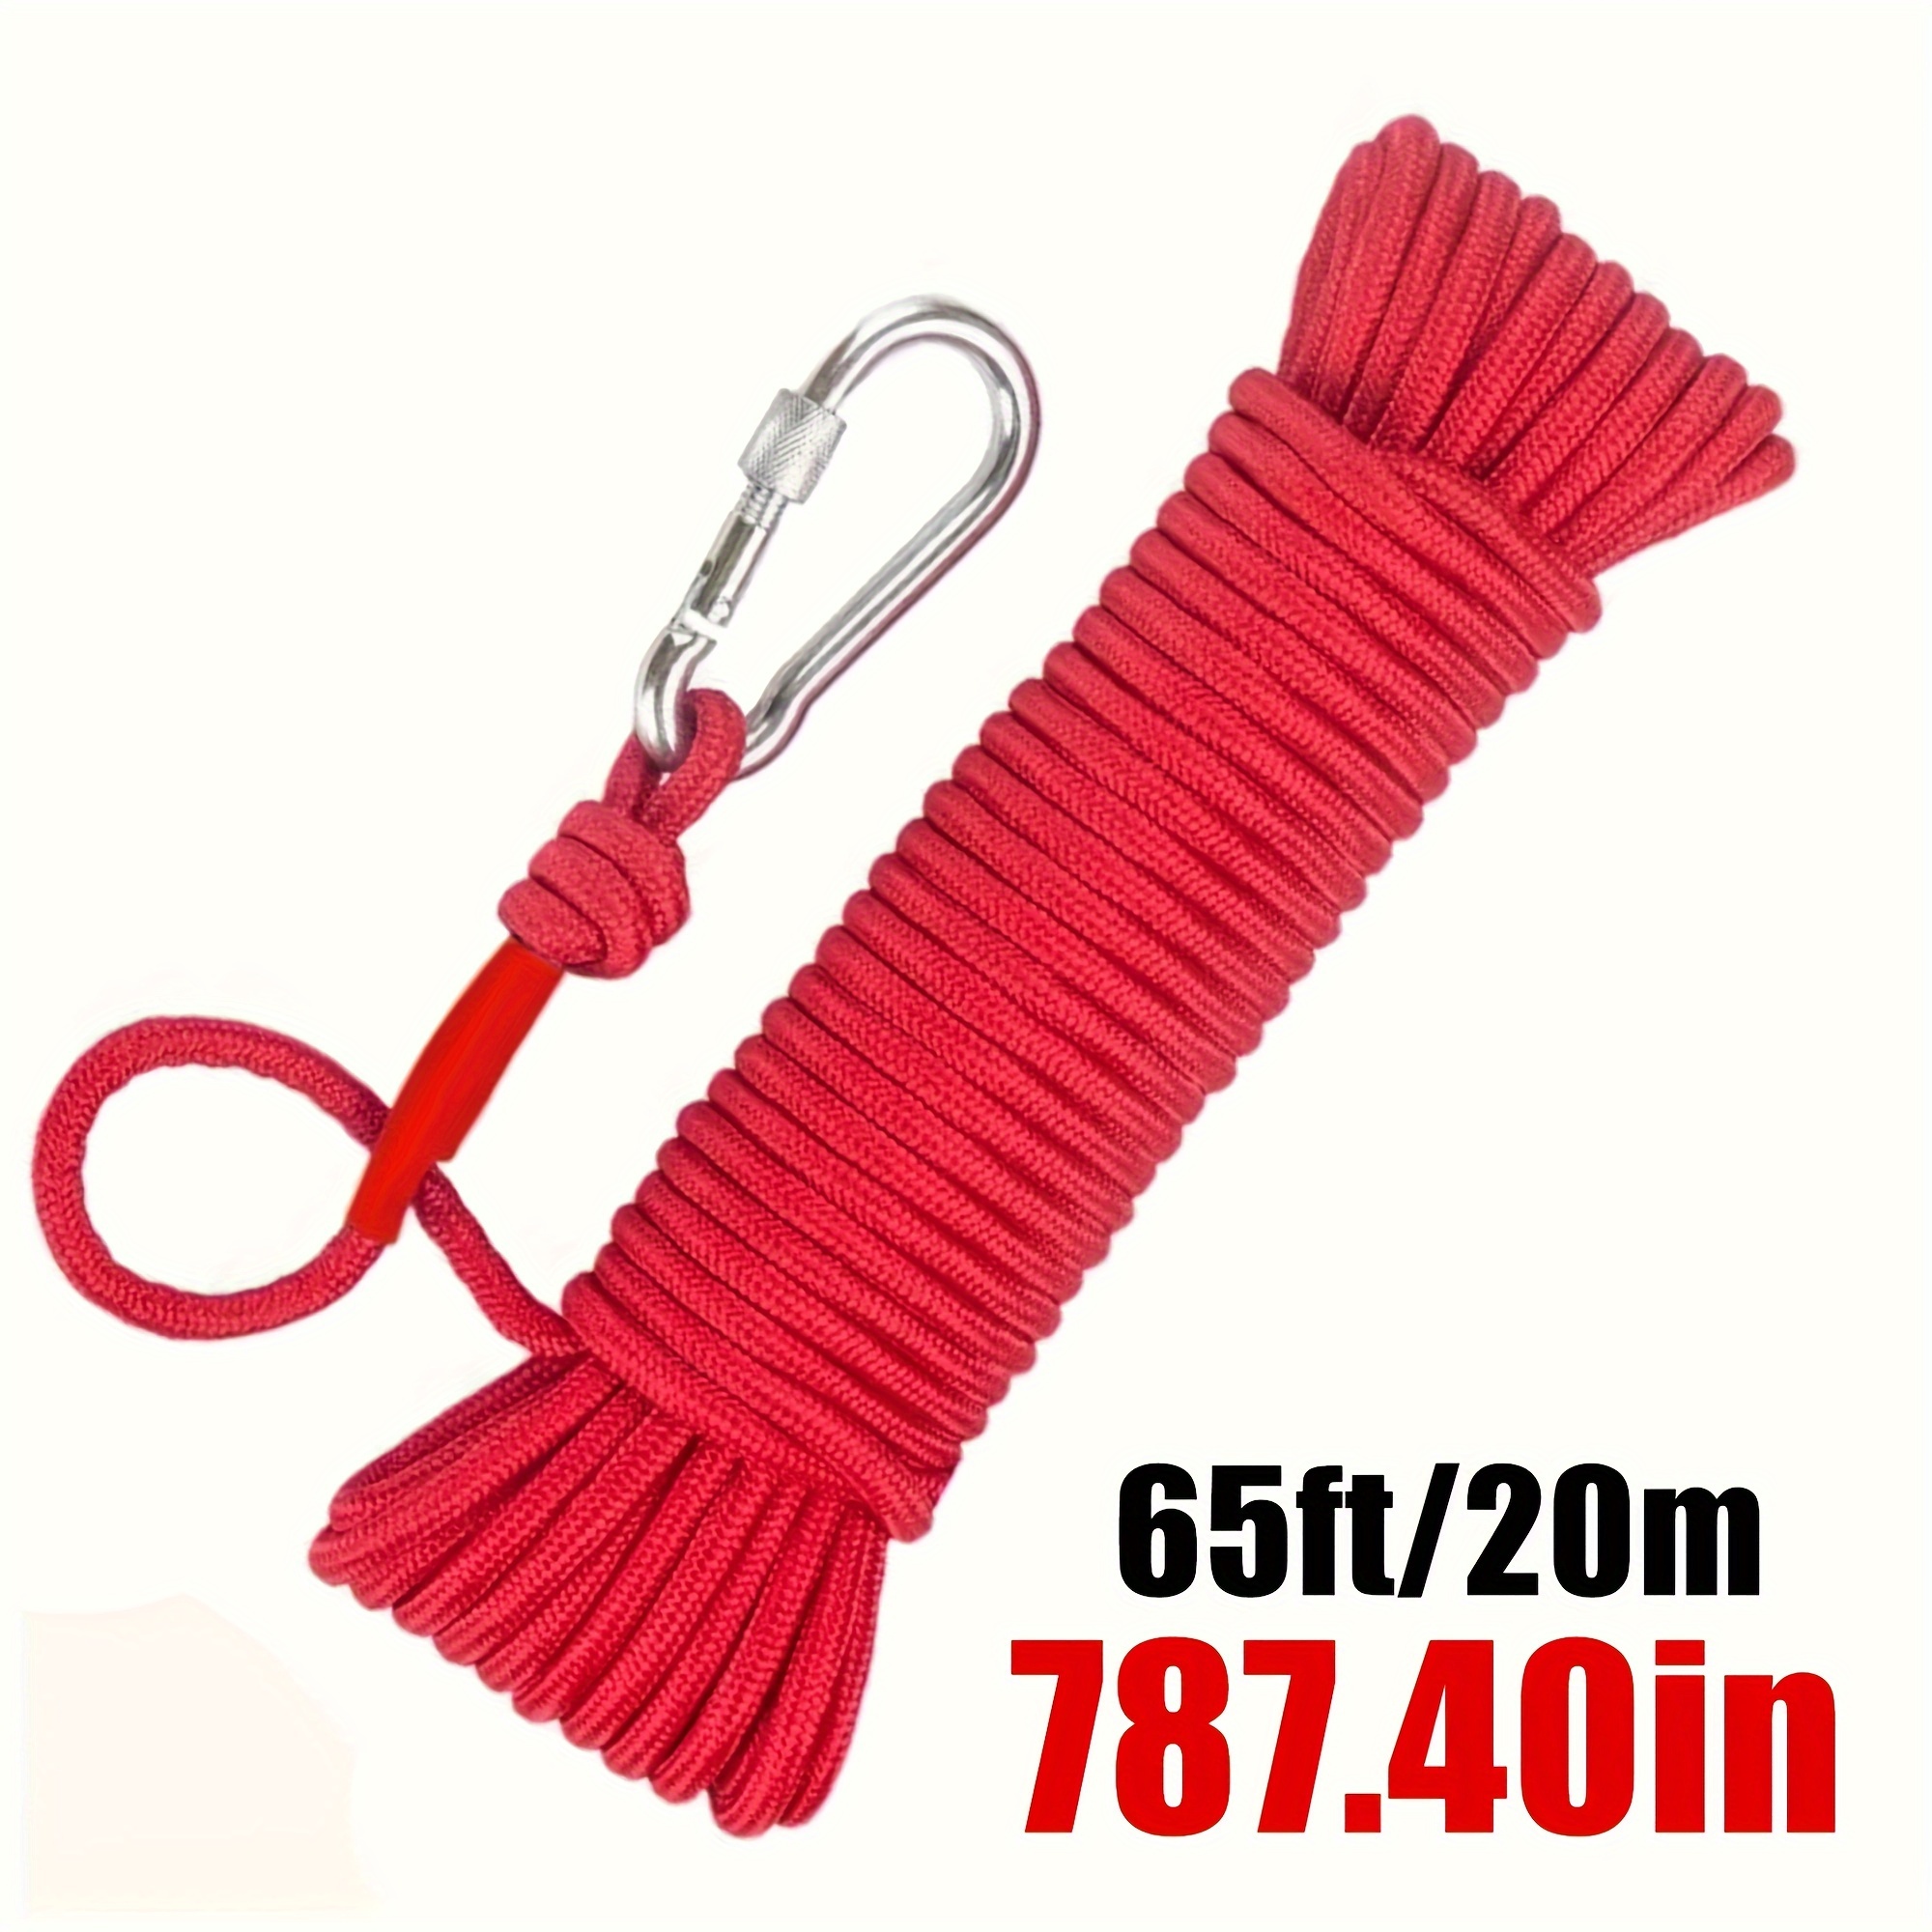 Nylon Rope 787.4inch Universal High Strength Rope Safety Braided Rope